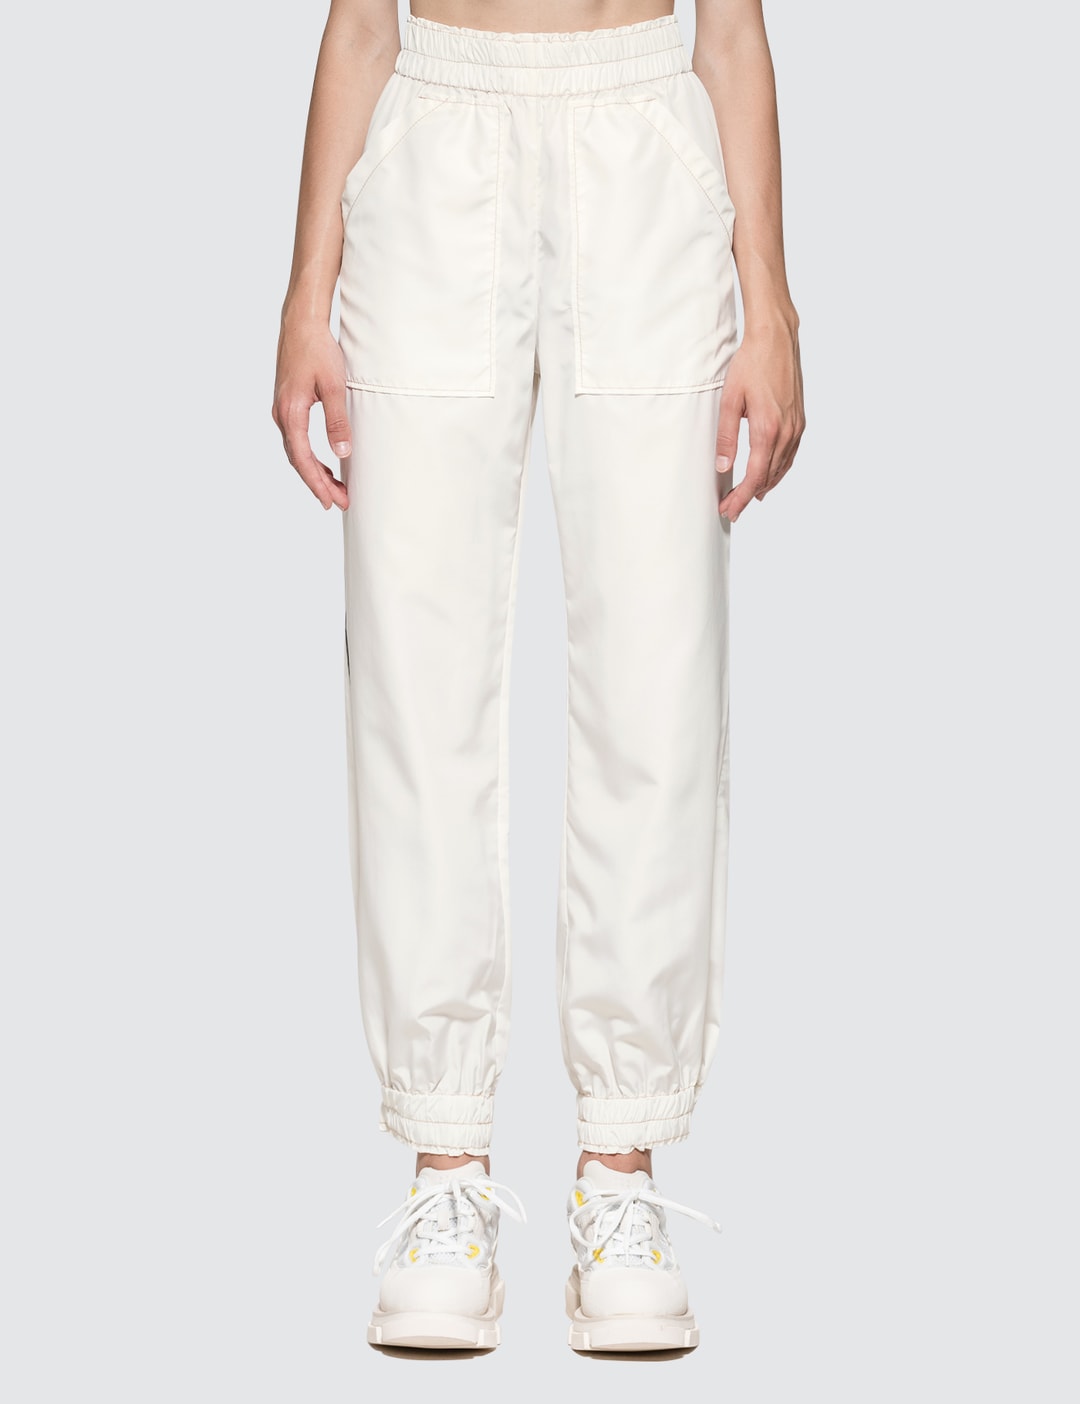 Ganni - Comstock Pants | HBX - Globally Curated Fashion and Lifestyle ...